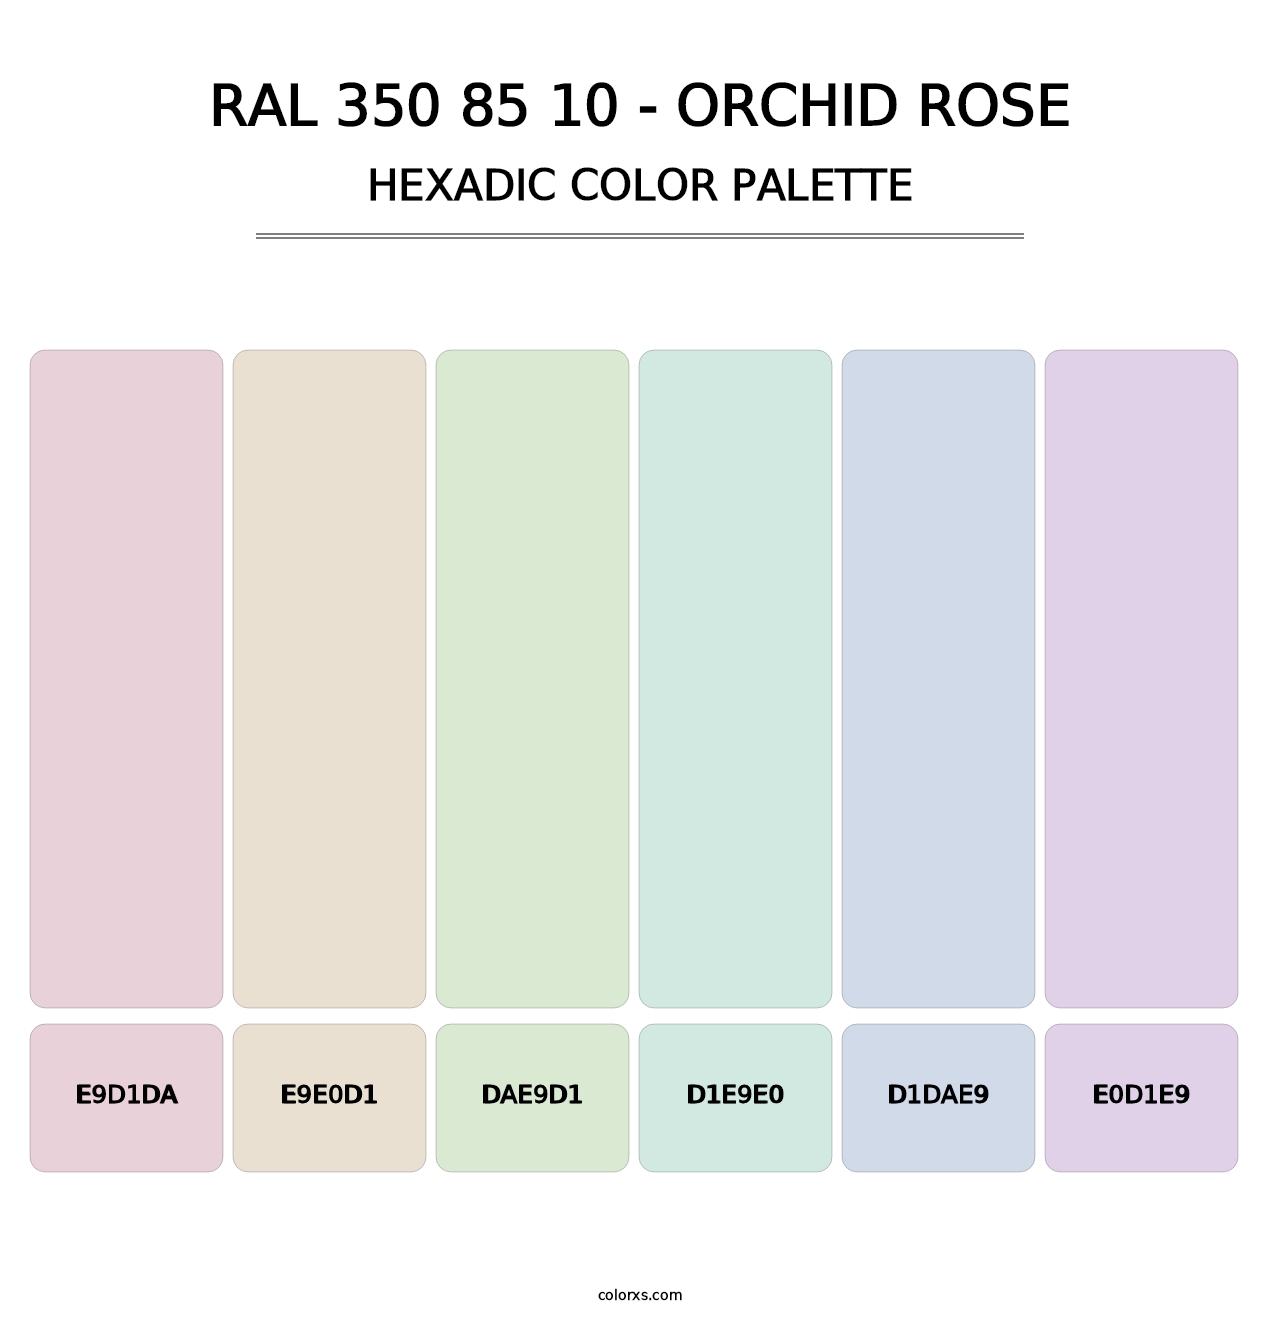 RAL 350 85 10 - Orchid Rose - Hexadic Color Palette